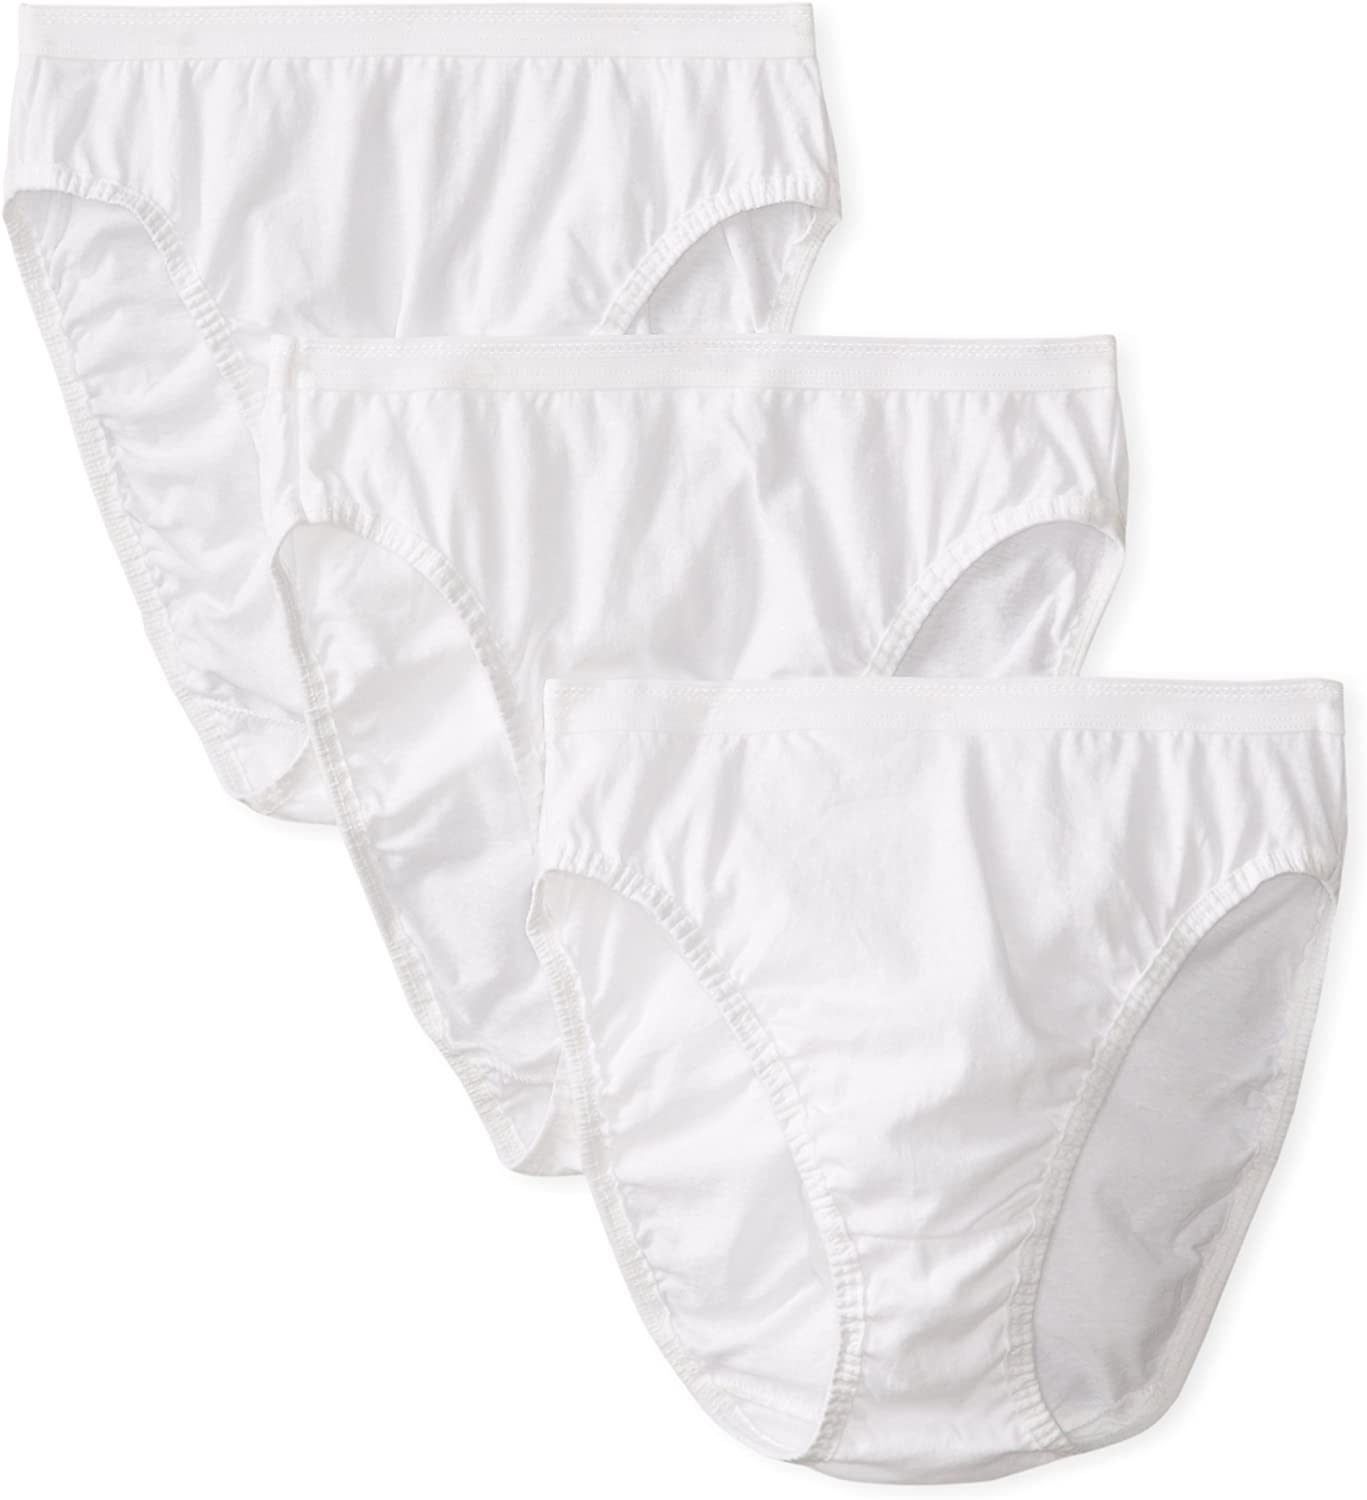 Price:$7.70 Fruit of the Loom Women's 3 Pack Cotton Hi-Cut Brief Panty at Amazon Women’s Clothing store